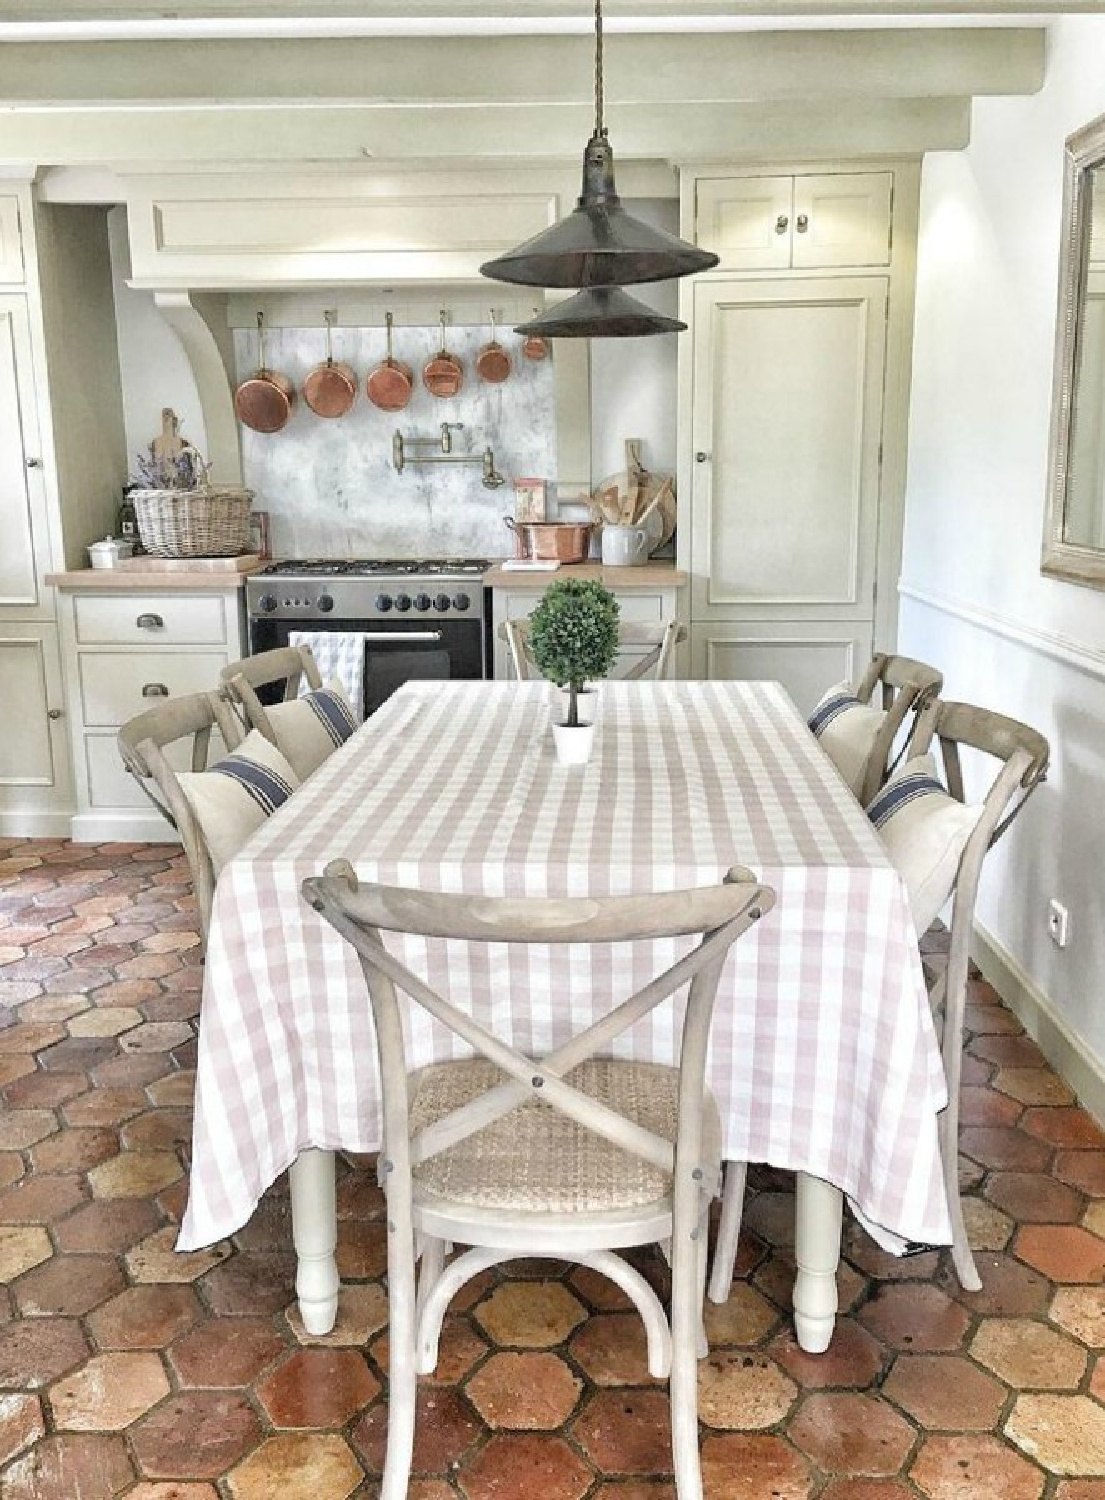 Vivi et Margot's French farmhouse kitchen with terracotta hex tile floor and gingham check tablecloth. #frenchfarmhouse #frenchkitchen